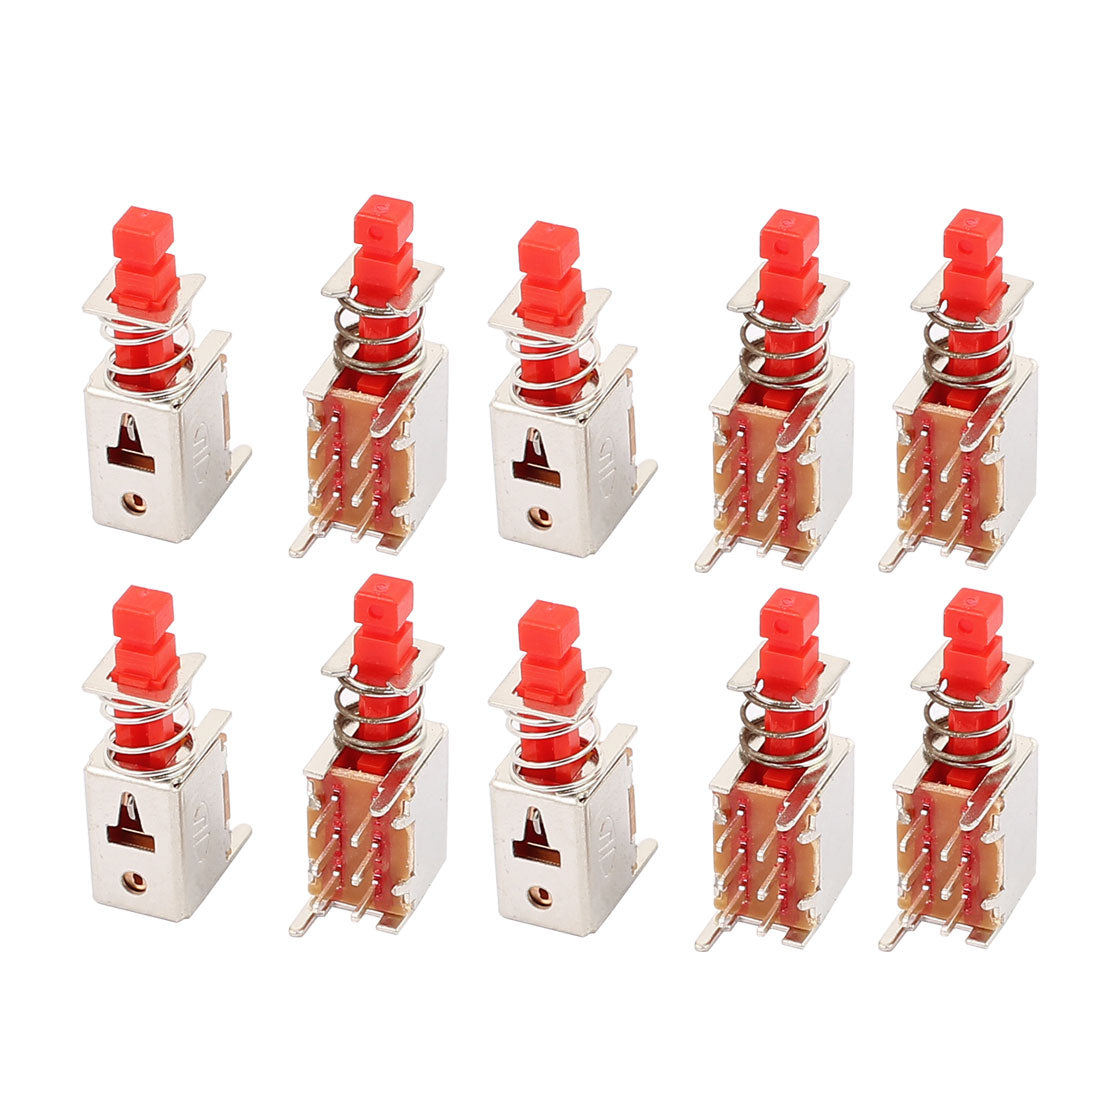 uxcell Uxcell 10Pcs 6 Pin 3.2mm Pitch Self-Locking Self Locking DPDT Mini Micro Push Button Switch